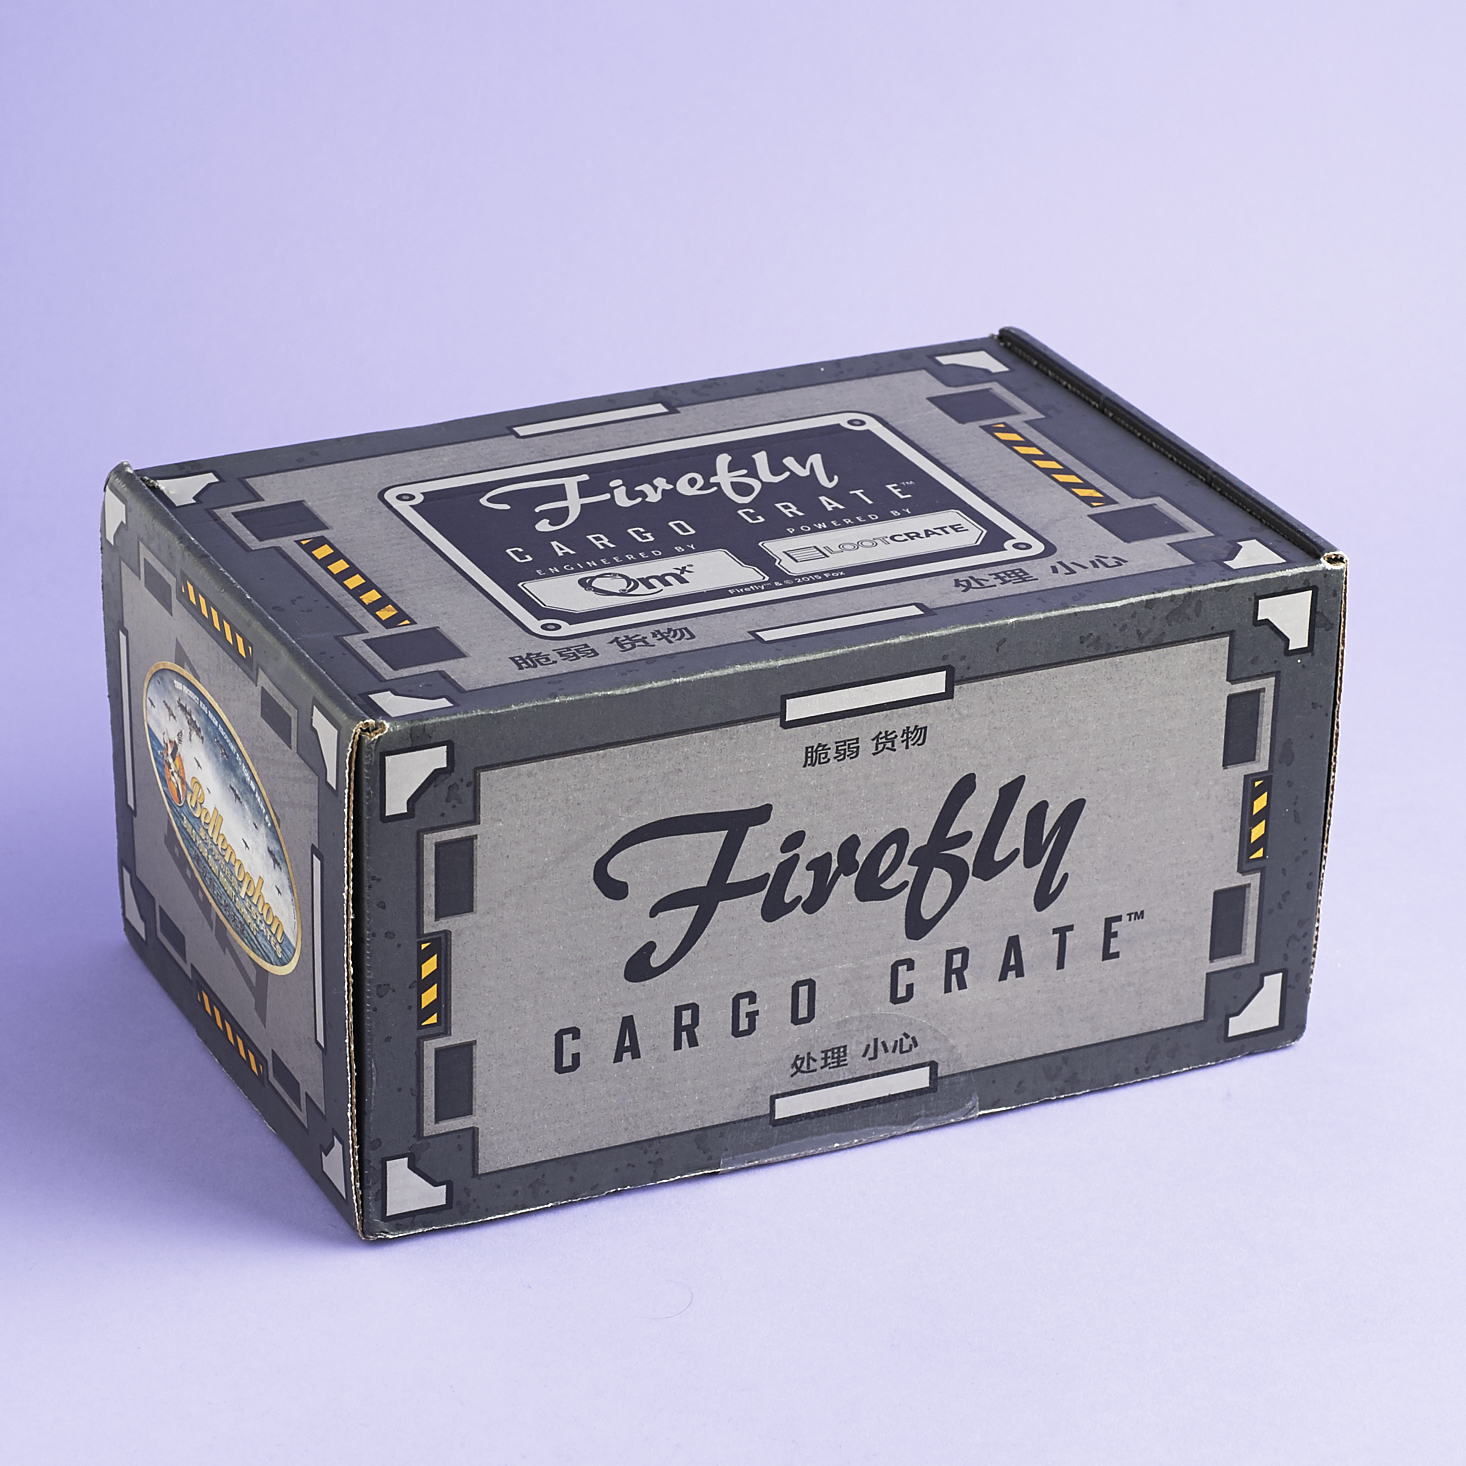 Firefly-Cargo-Crate-February-2017-0001